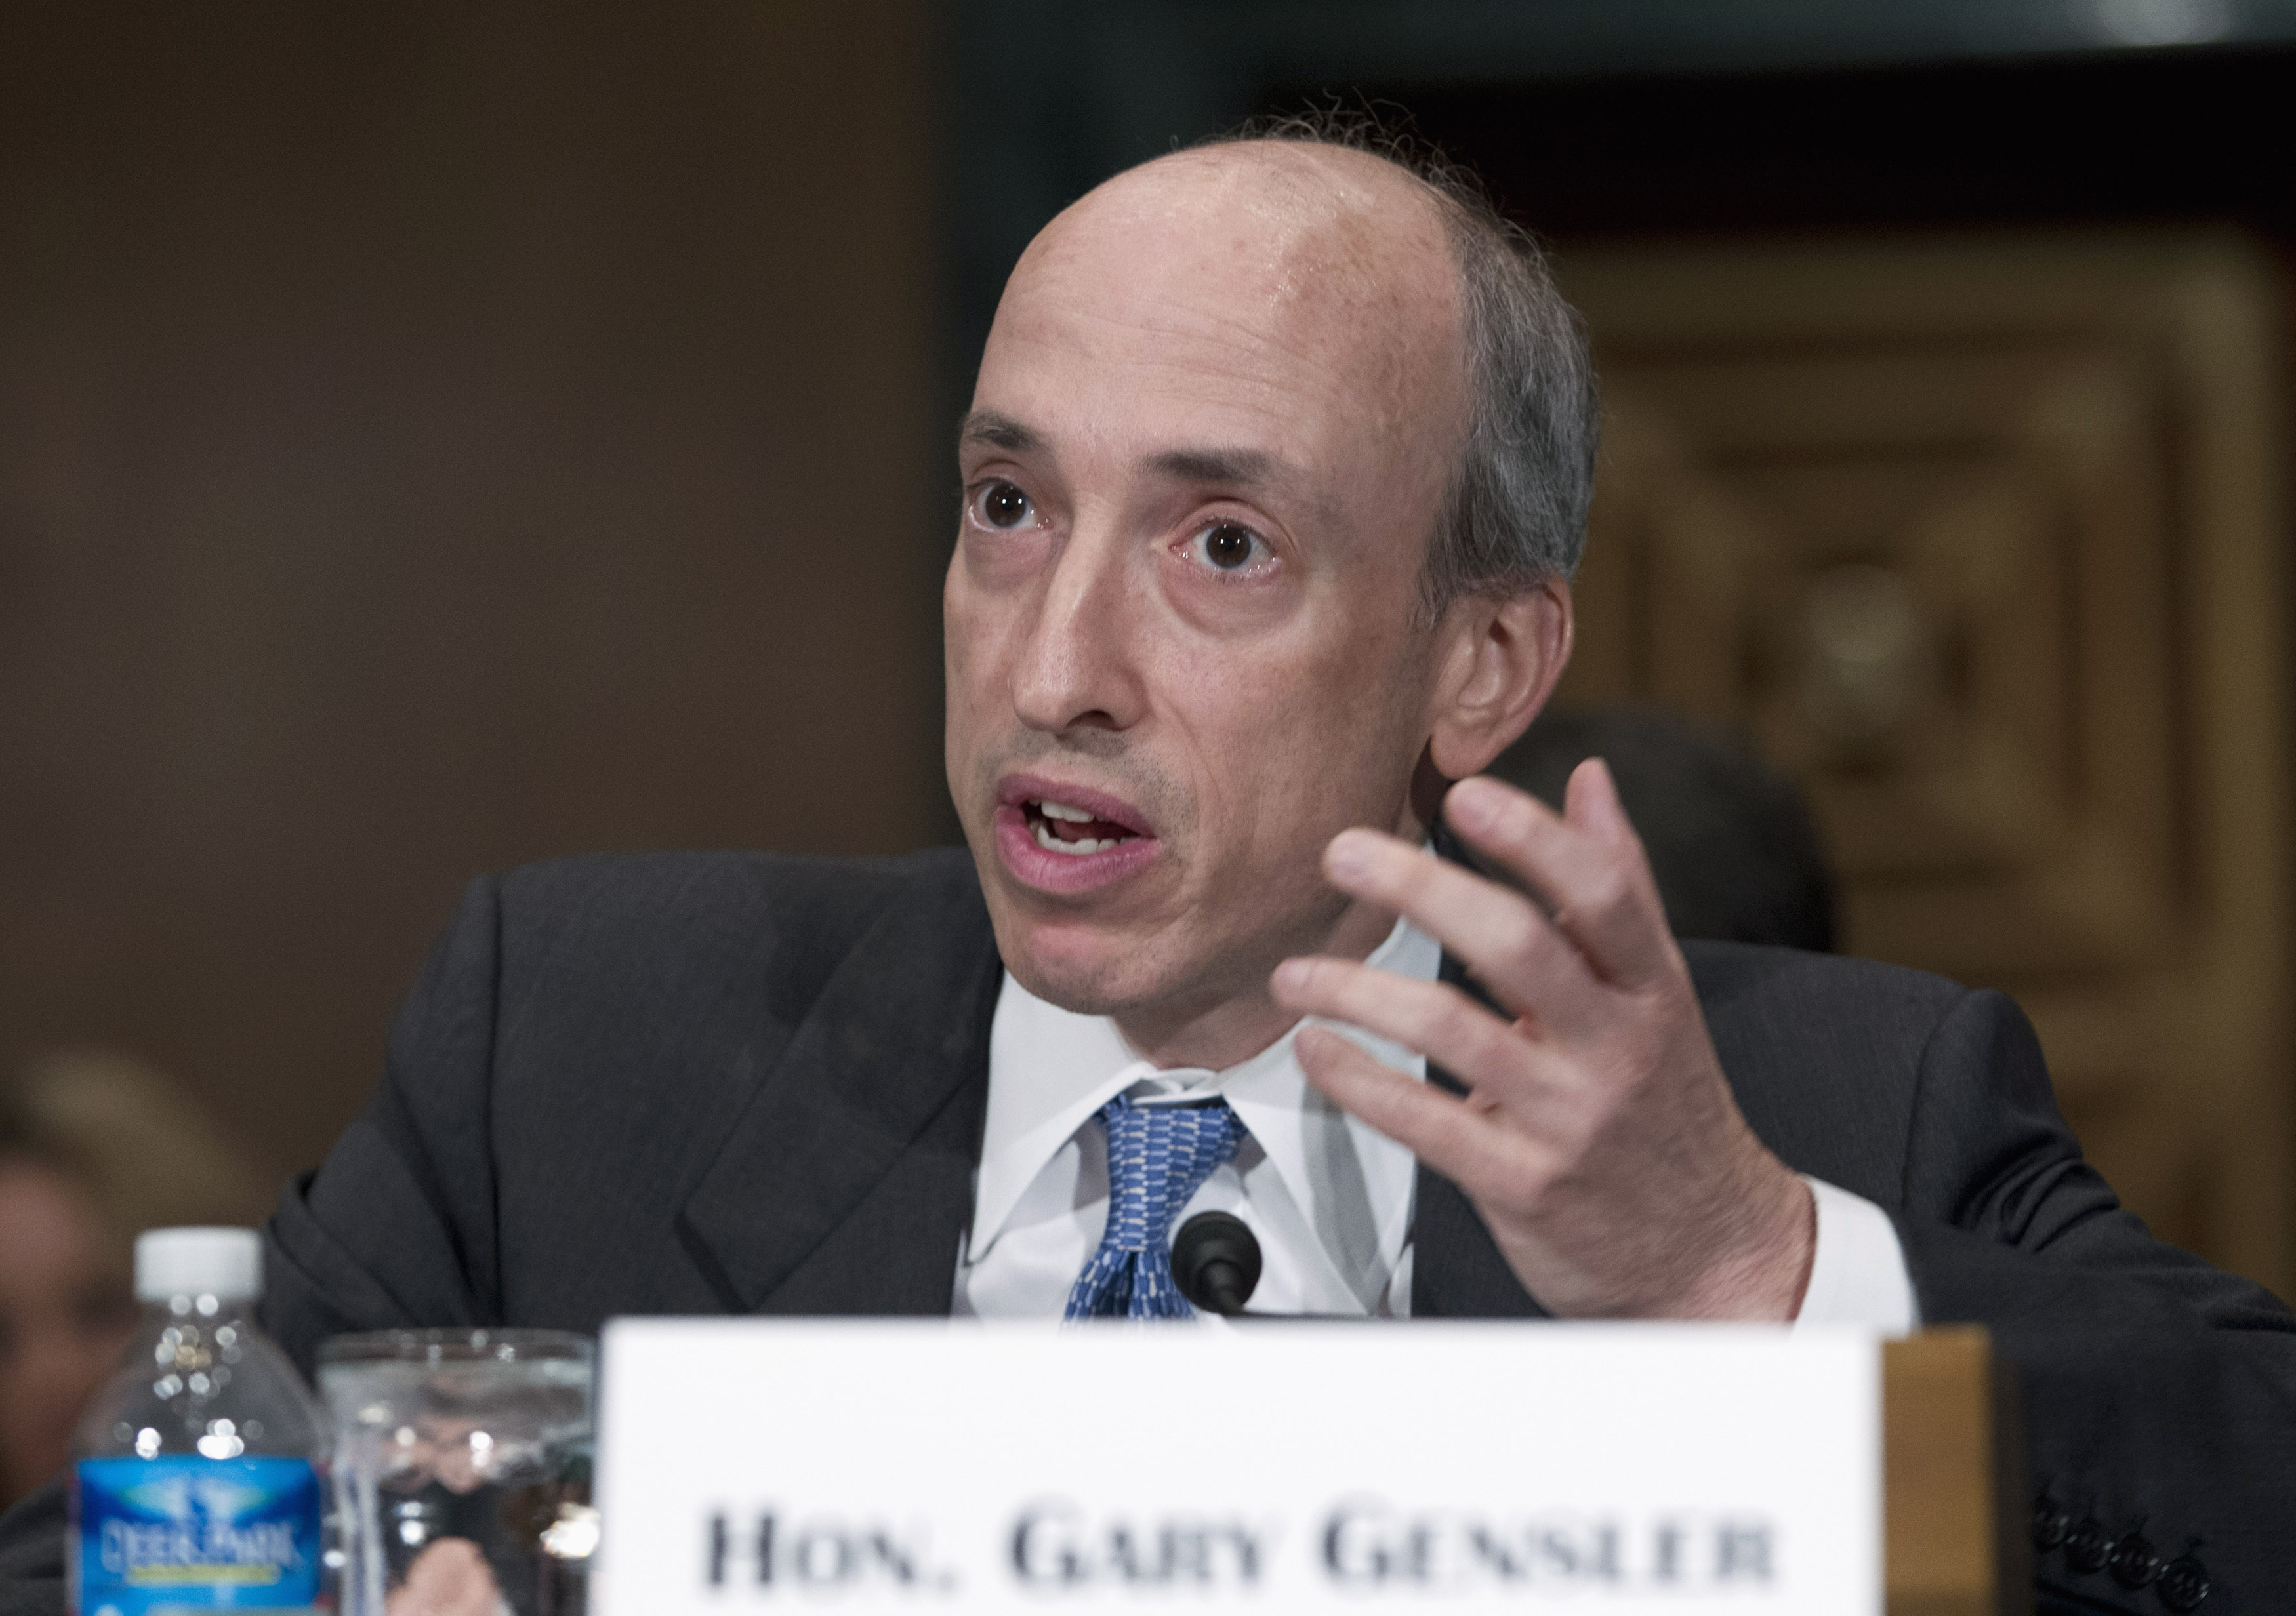 Commodity Futures Trading Commission Chair Gensler testifies at Senate Banking, Housing and Urban Affairs Committee hearing on Capitol Hill